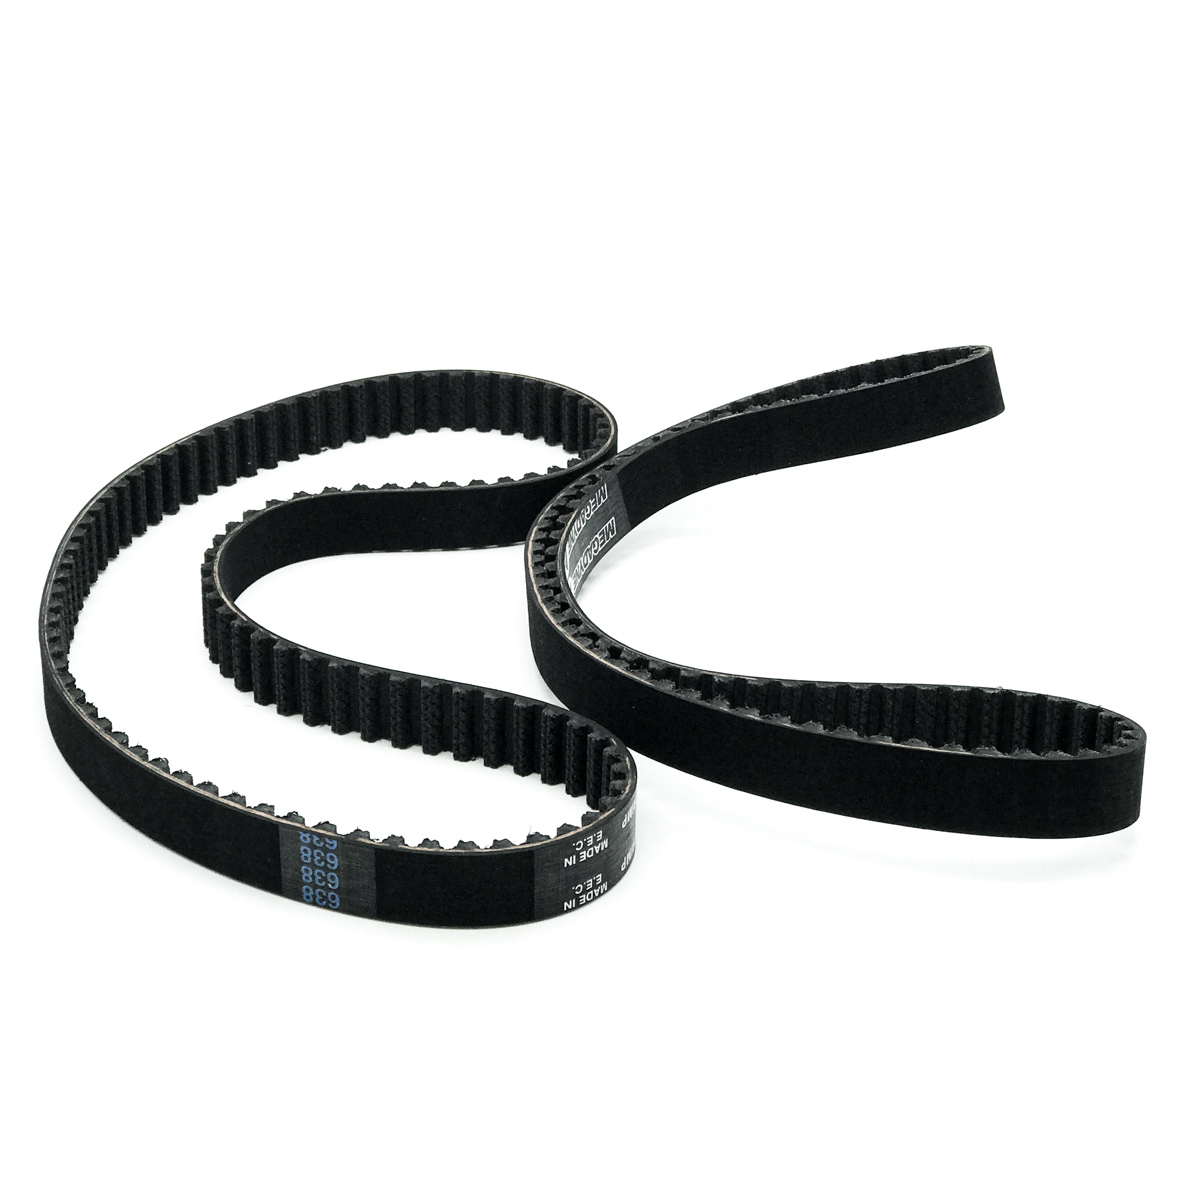 Haas Mill Spindle Drive Belt – 93-54-2660 Haas Machine Spindle Drive Belt Matched set of 2 93-54-2660 VF, HS, EC